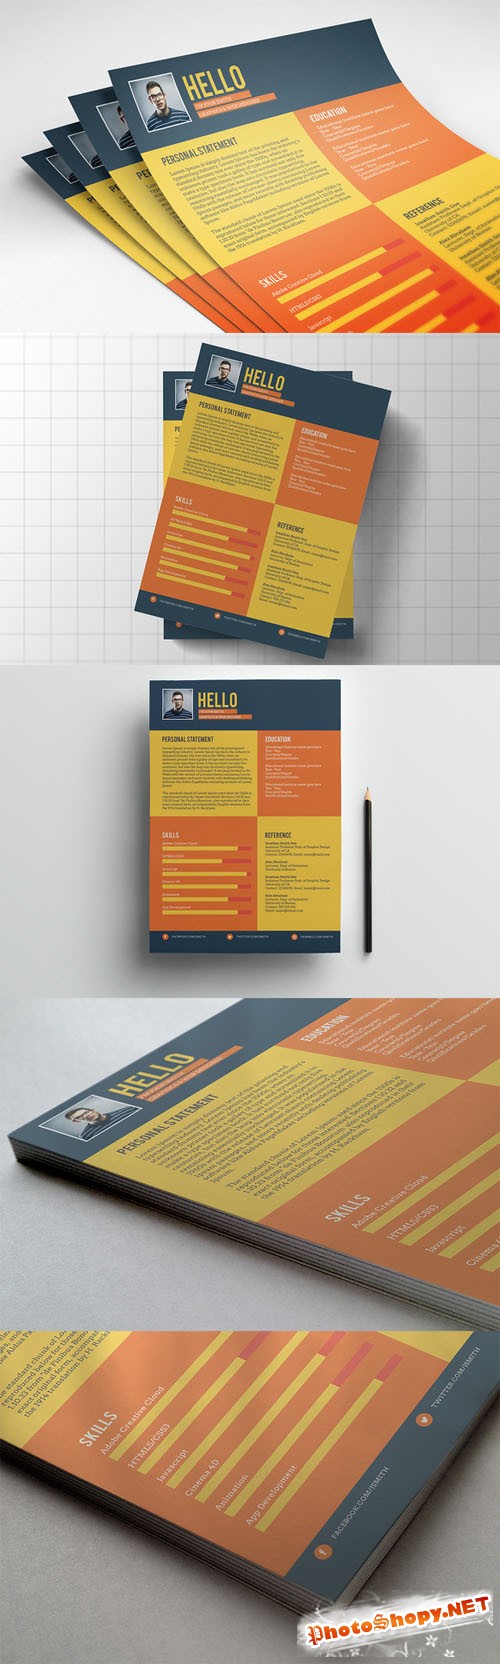 Flat Style Resume Template PSD